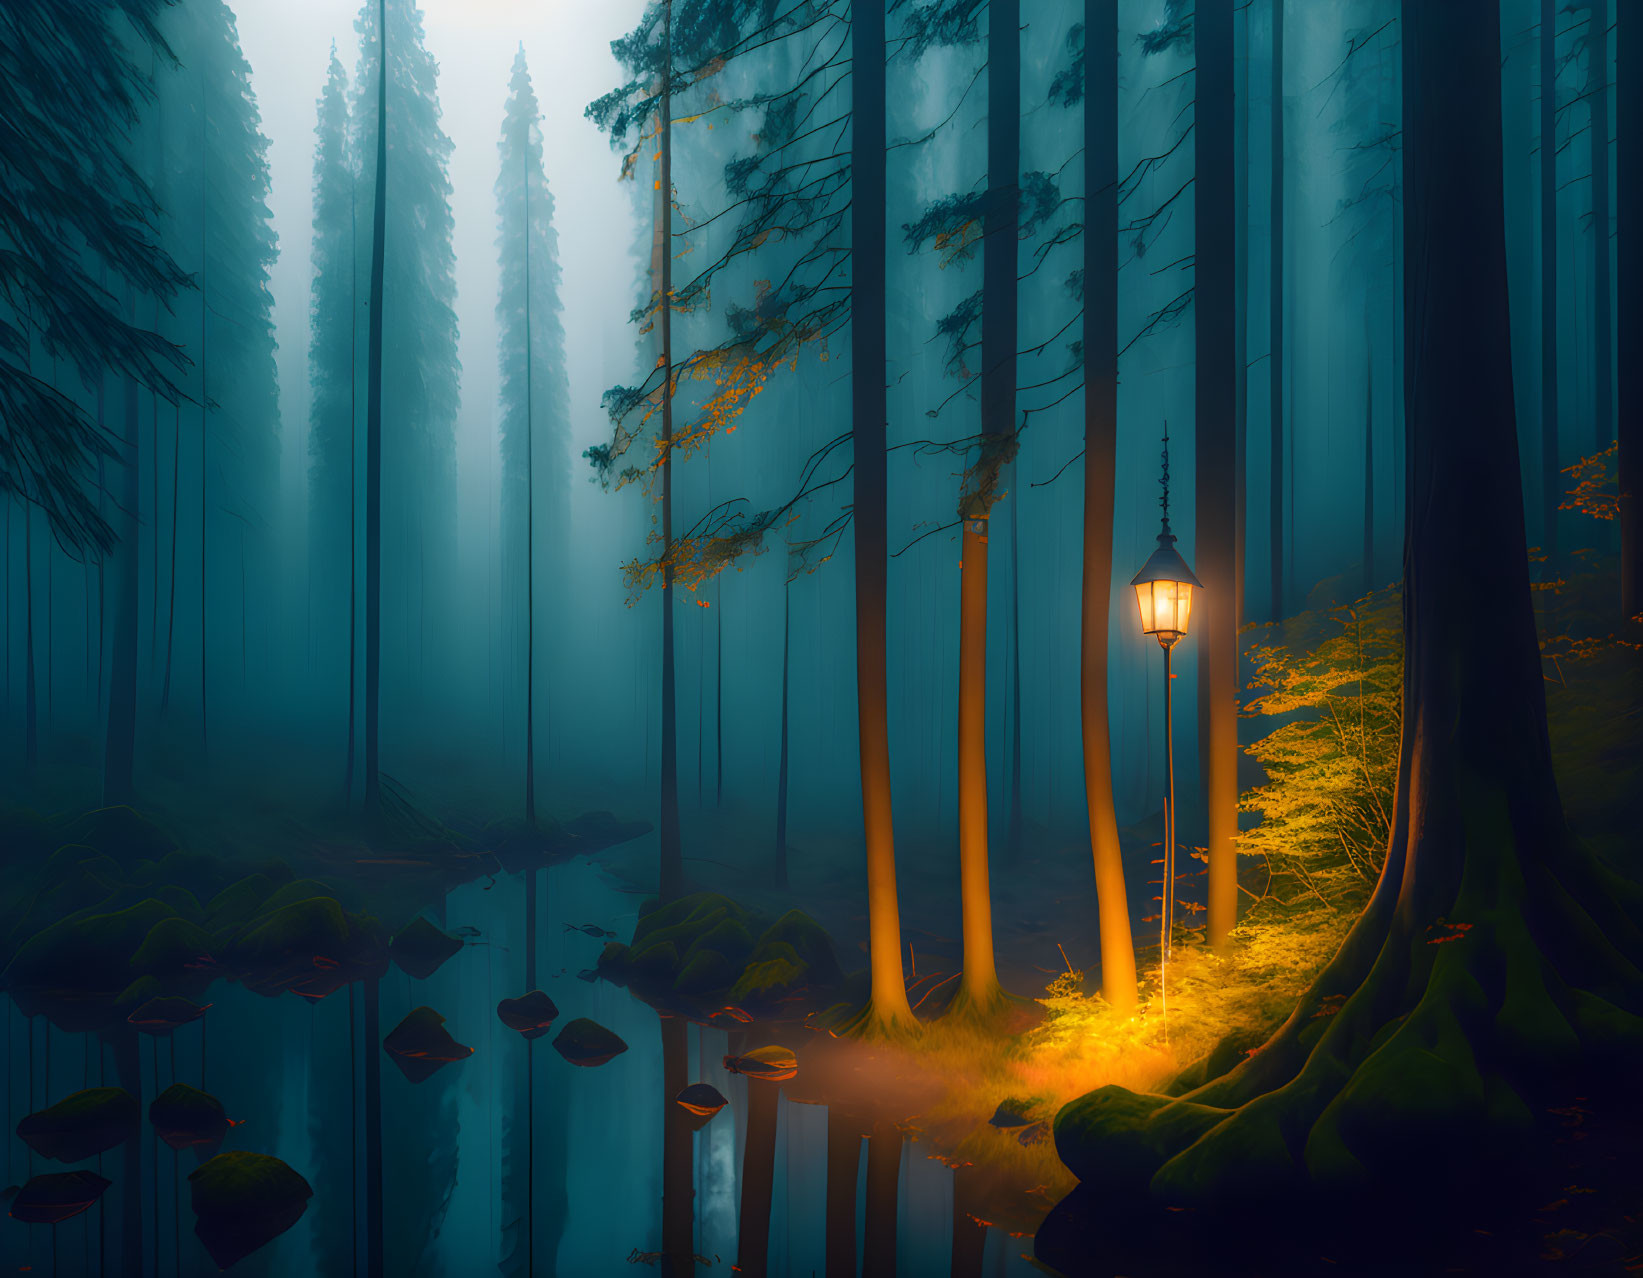 Enchanted forest with tall trees, blue fog, lamppost, pond, and twilight sky